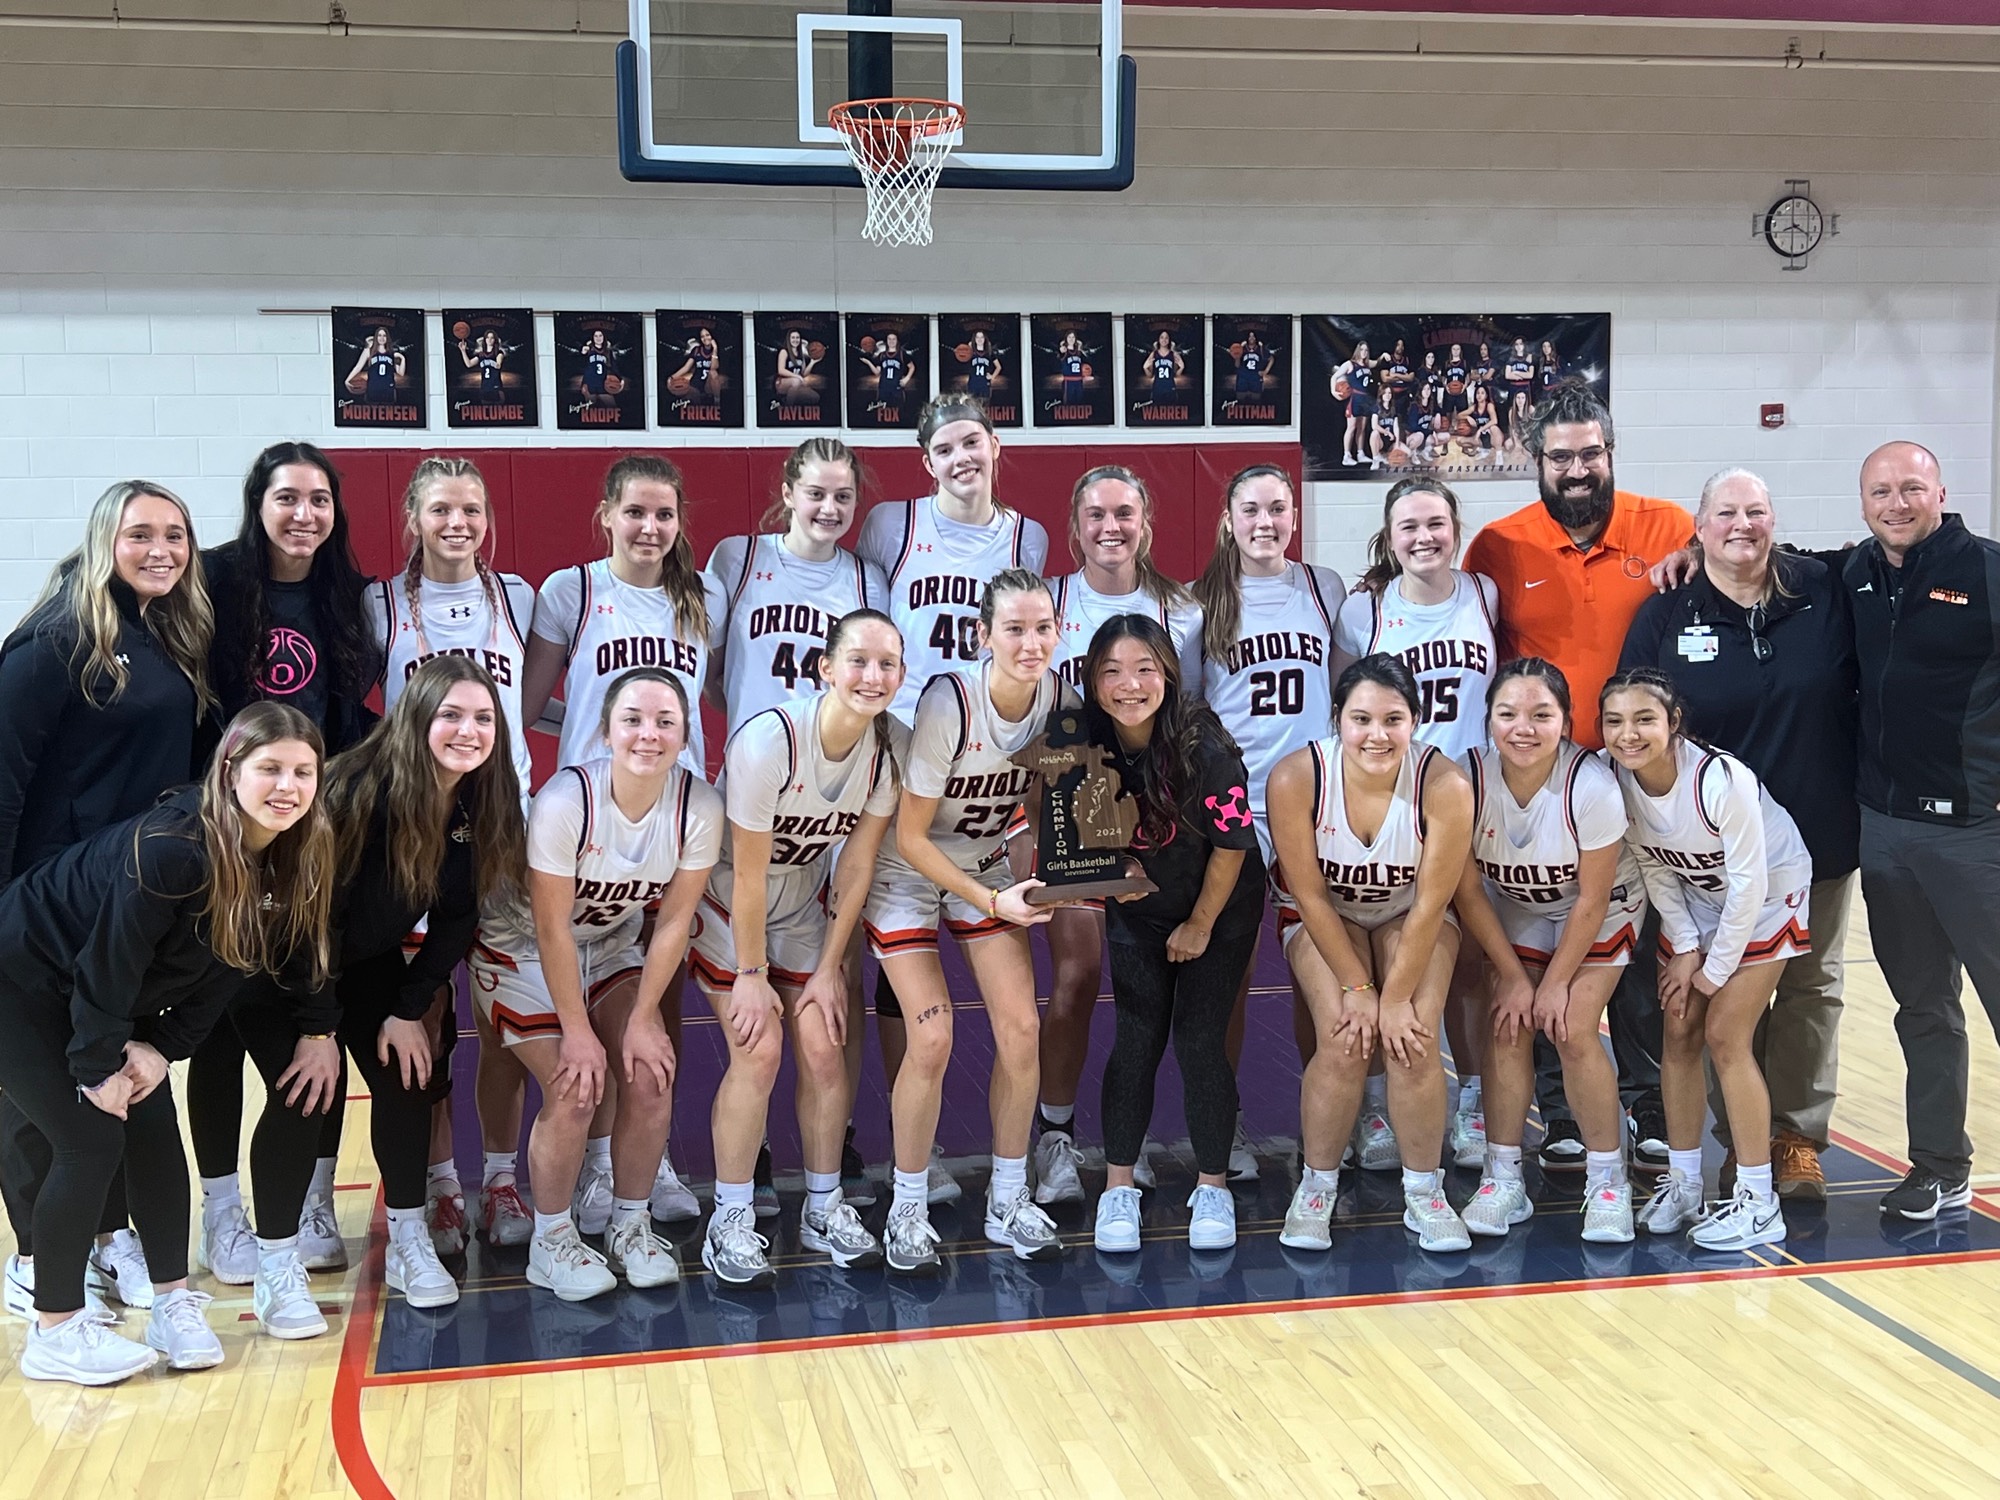 1709999828_24GBBDistrictChampions.jpg - Image for Congratulations Lady O's Girls Basketball District Champions